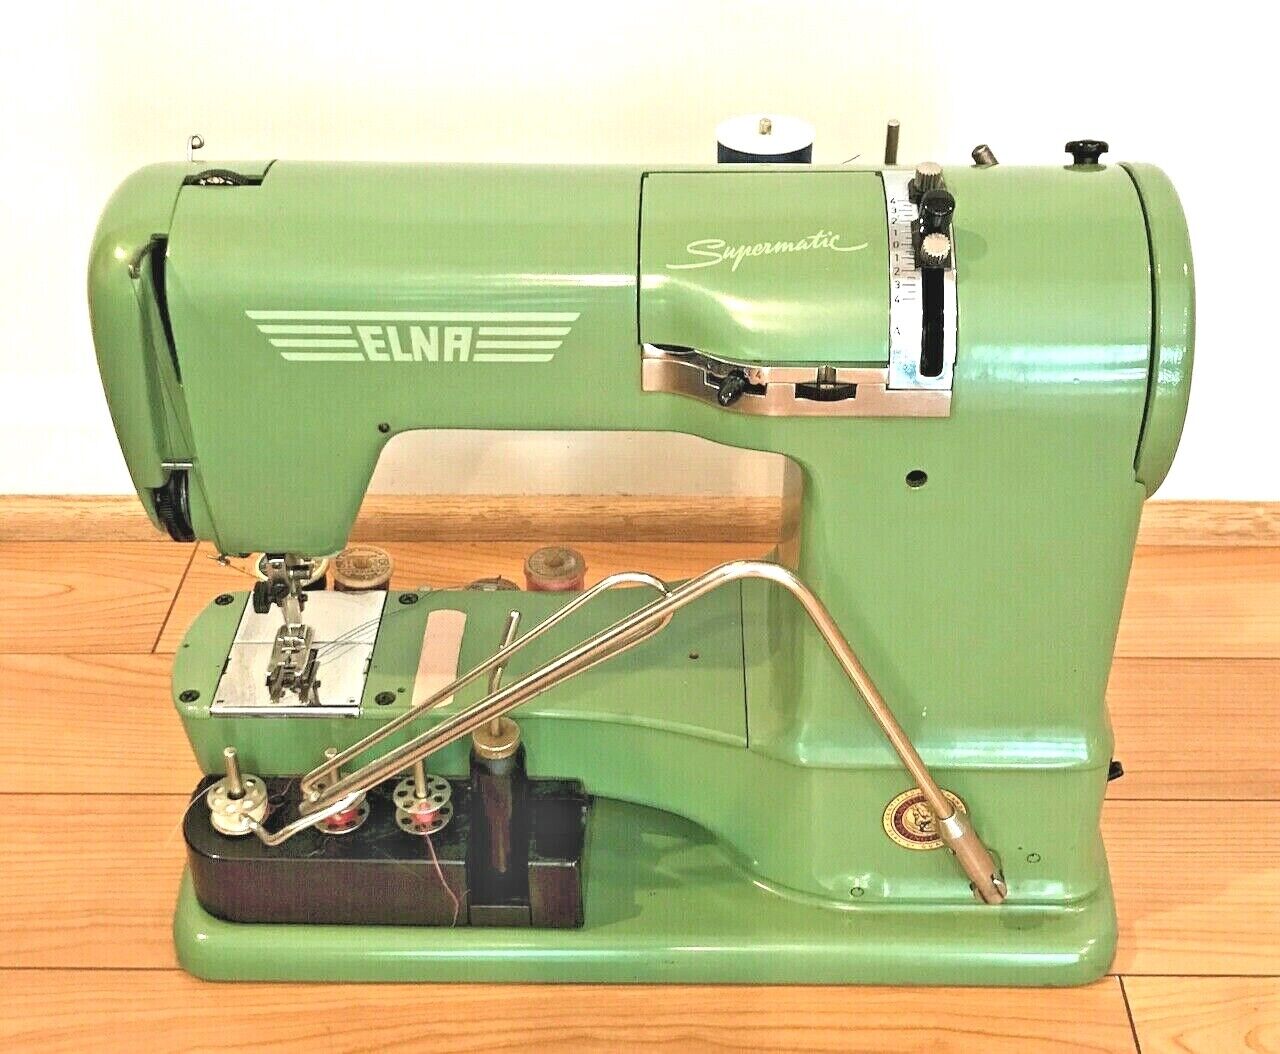 Elna Supermatic Vintage Sewing Machine Type 722010 Metal Carry Case, Tray, Cord